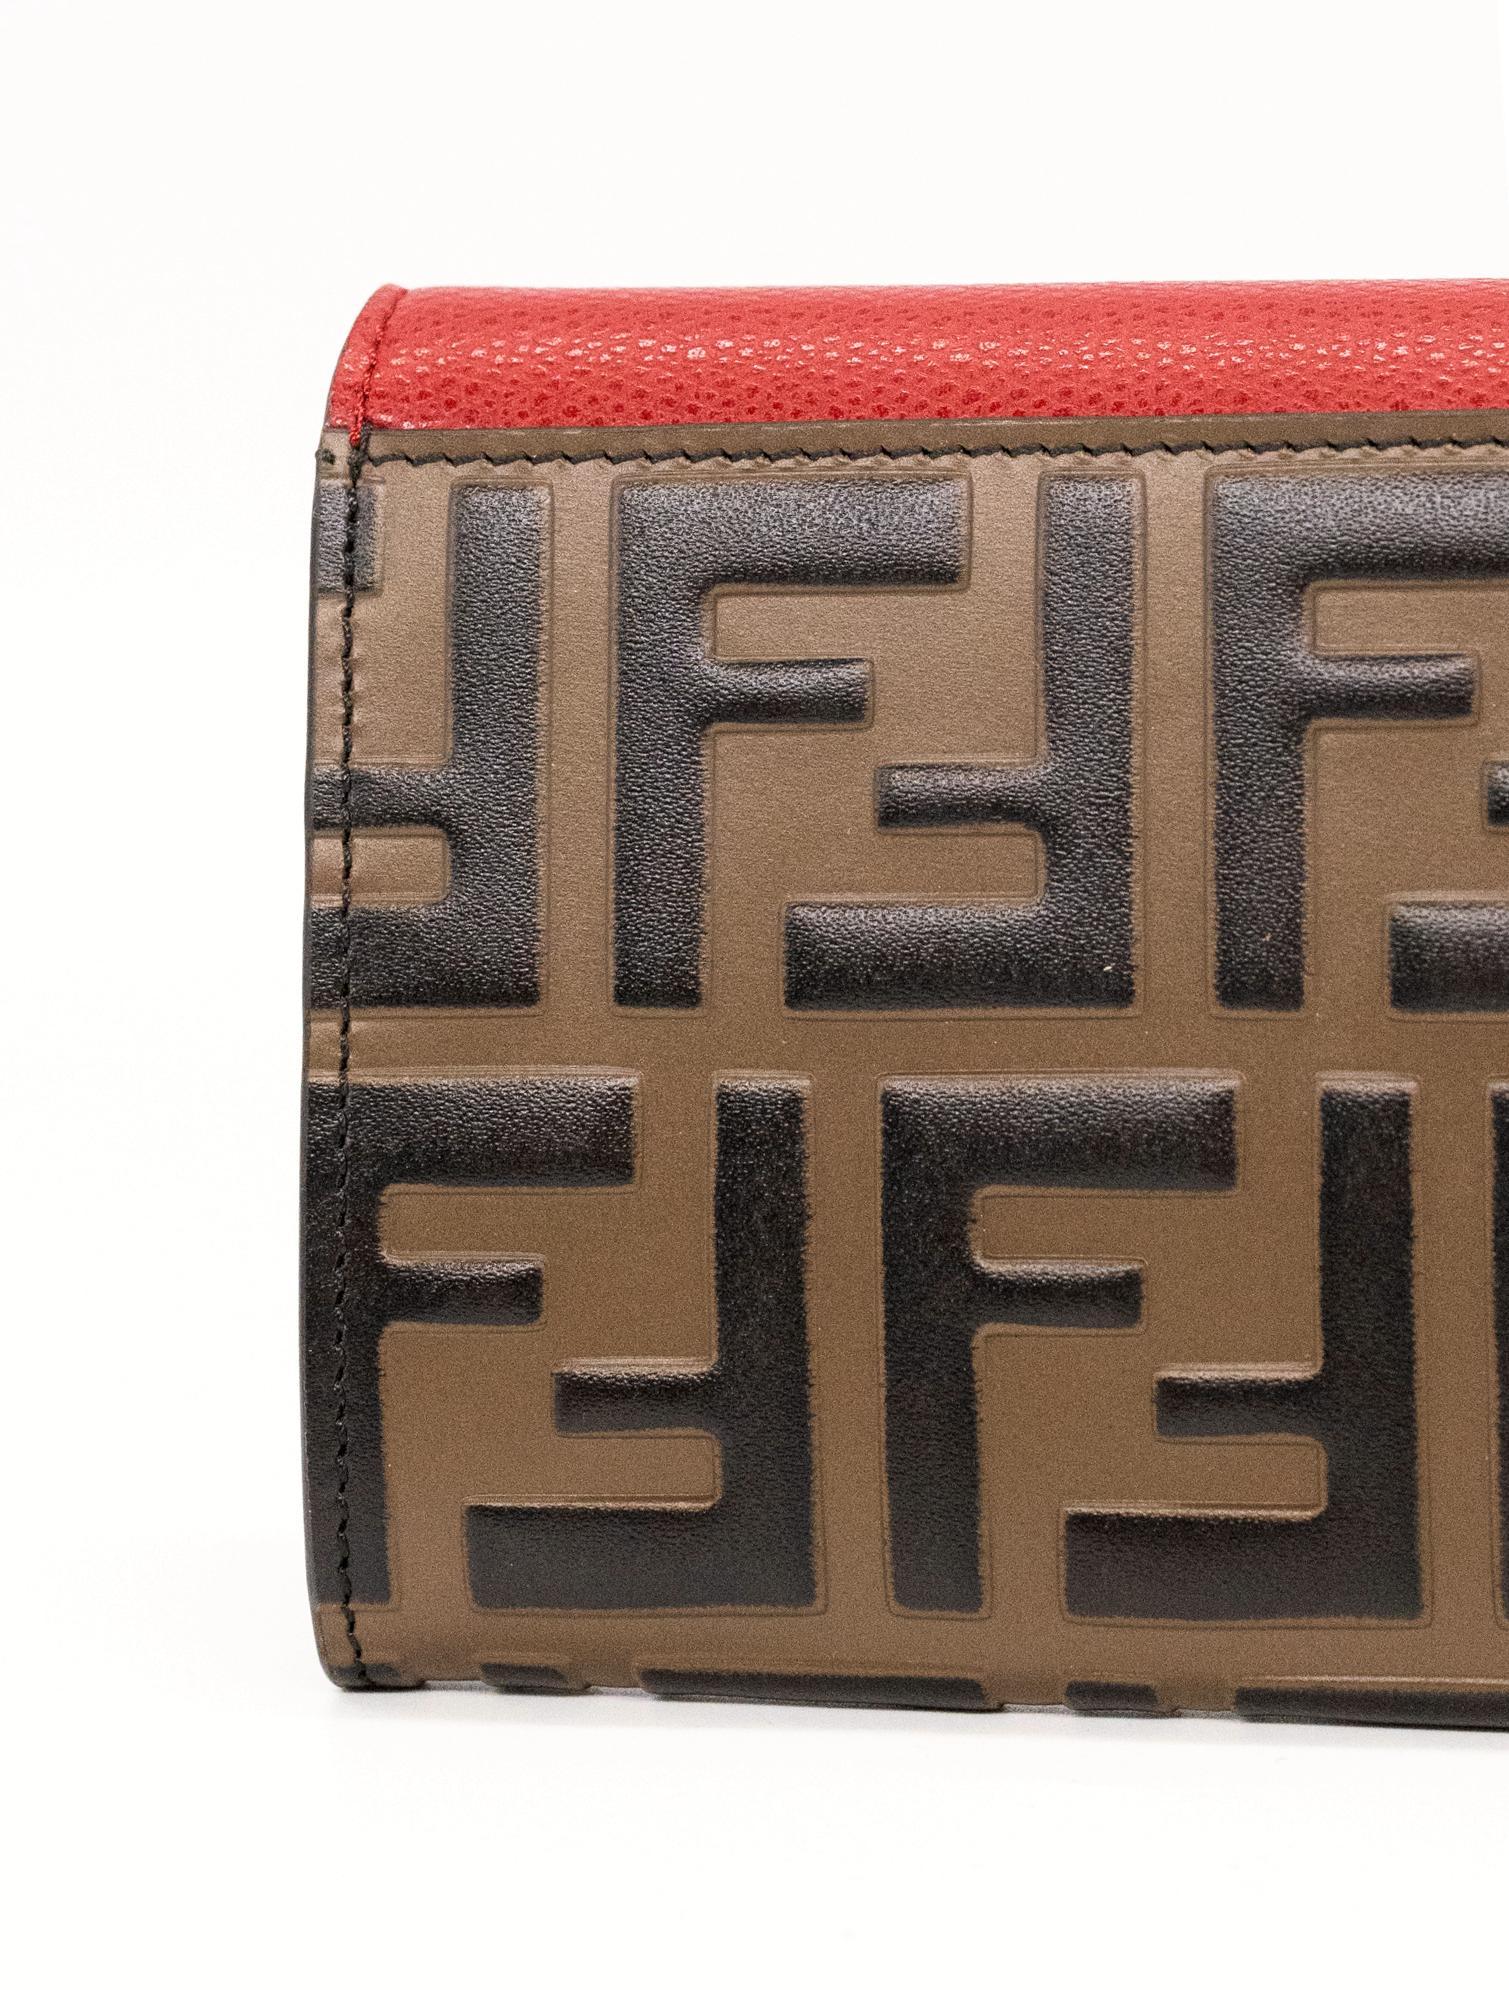 Fendi Continental Red Leather Embossed Wallet, 2020. For Sale 4